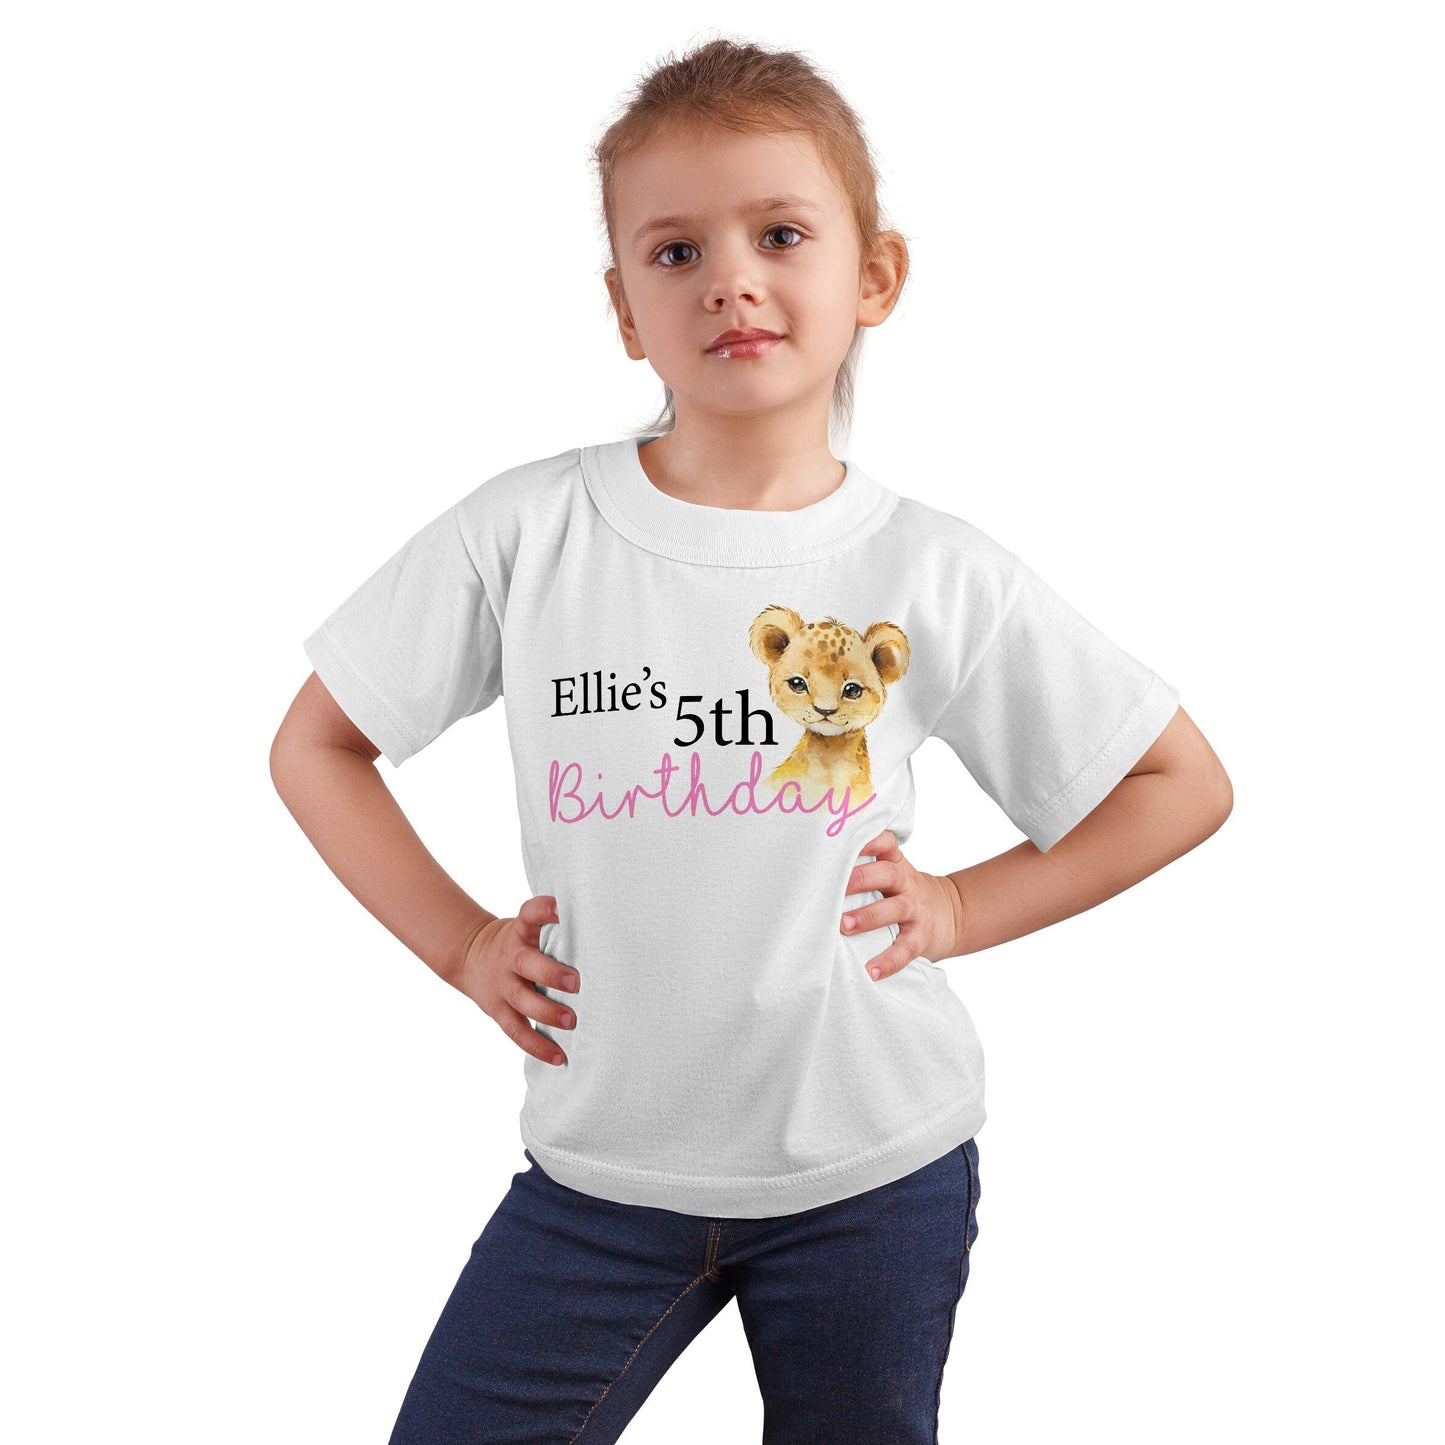 Personalised Girls Birthday T-Shirt, Leopard Design With Name, Custom Clothing, Kids Tee, Floral, 2nd, 3rd, 4th, 5th,6th, 7th, 8th